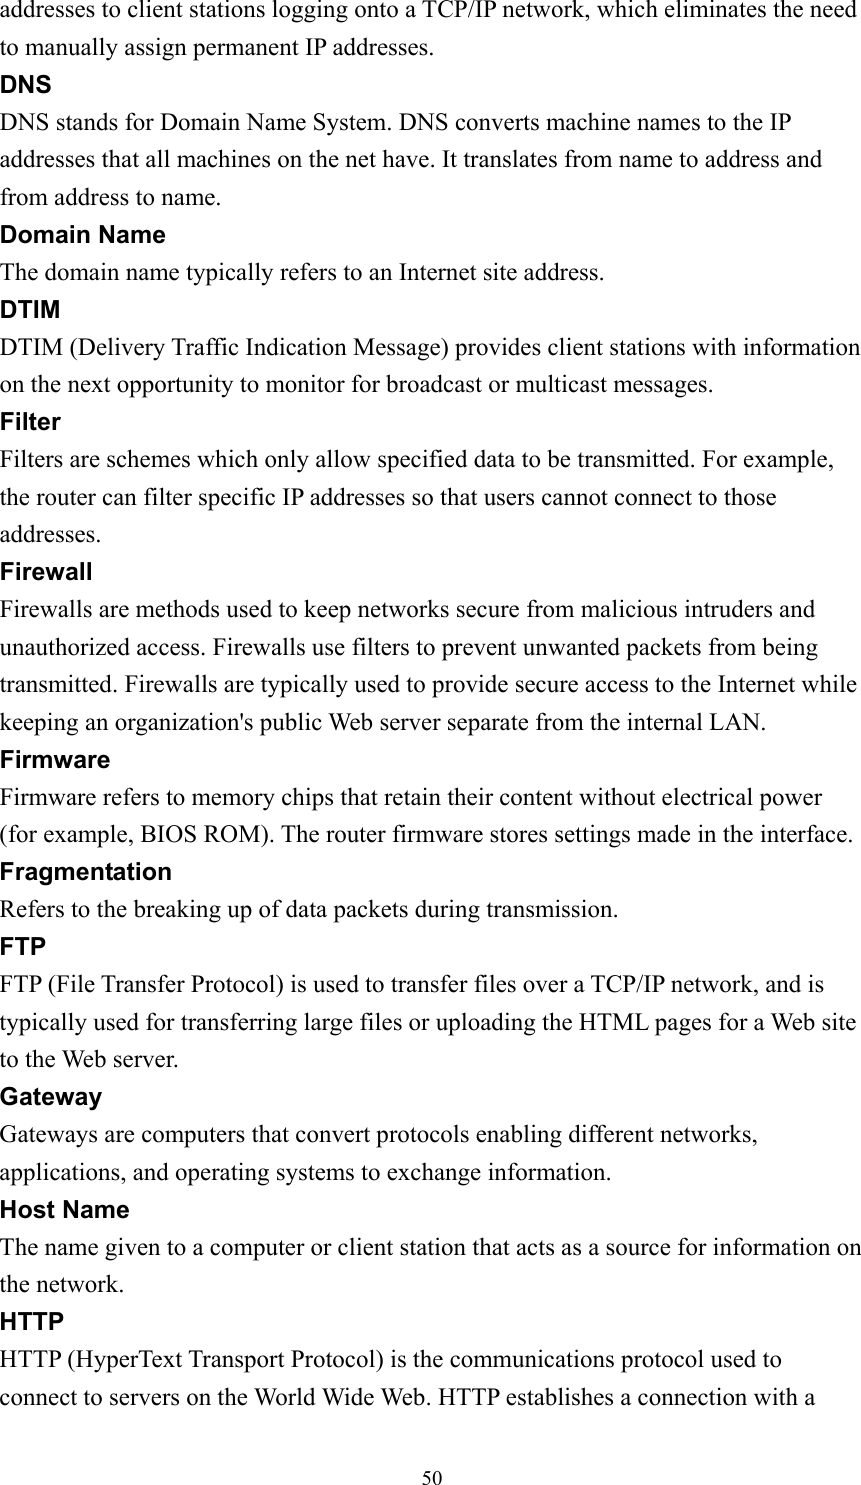 addresses to client stations logging onto a TCP/IP network, which eliminates the need to manually assign permanent IP addresses. DNS DNS stands for Domain Name System. DNS converts machine names to the IP addresses that all machines on the net have. It translates from name to address and from address to name. Domain Name The domain name typically refers to an Internet site address. DTIM DTIM (Delivery Traffic Indication Message) provides client stations with information on the next opportunity to monitor for broadcast or multicast messages. Filter Filters are schemes which only allow specified data to be transmitted. For example, the router can filter specific IP addresses so that users cannot connect to those addresses. Firewall Firewalls are methods used to keep networks secure from malicious intruders and unauthorized access. Firewalls use filters to prevent unwanted packets from being transmitted. Firewalls are typically used to provide secure access to the Internet while keeping an organization&apos;s public Web server separate from the internal LAN. Firmware Firmware refers to memory chips that retain their content without electrical power (for example, BIOS ROM). The router firmware stores settings made in the interface. Fragmentation Refers to the breaking up of data packets during transmission. FTP FTP (File Transfer Protocol) is used to transfer files over a TCP/IP network, and is typically used for transferring large files or uploading the HTML pages for a Web site to the Web server. Gateway Gateways are computers that convert protocols enabling different networks, applications, and operating systems to exchange information. Host Name The name given to a computer or client station that acts as a source for information on the network. HTTP HTTP (HyperText Transport Protocol) is the communications protocol used to connect to servers on the World Wide Web. HTTP establishes a connection with a  50